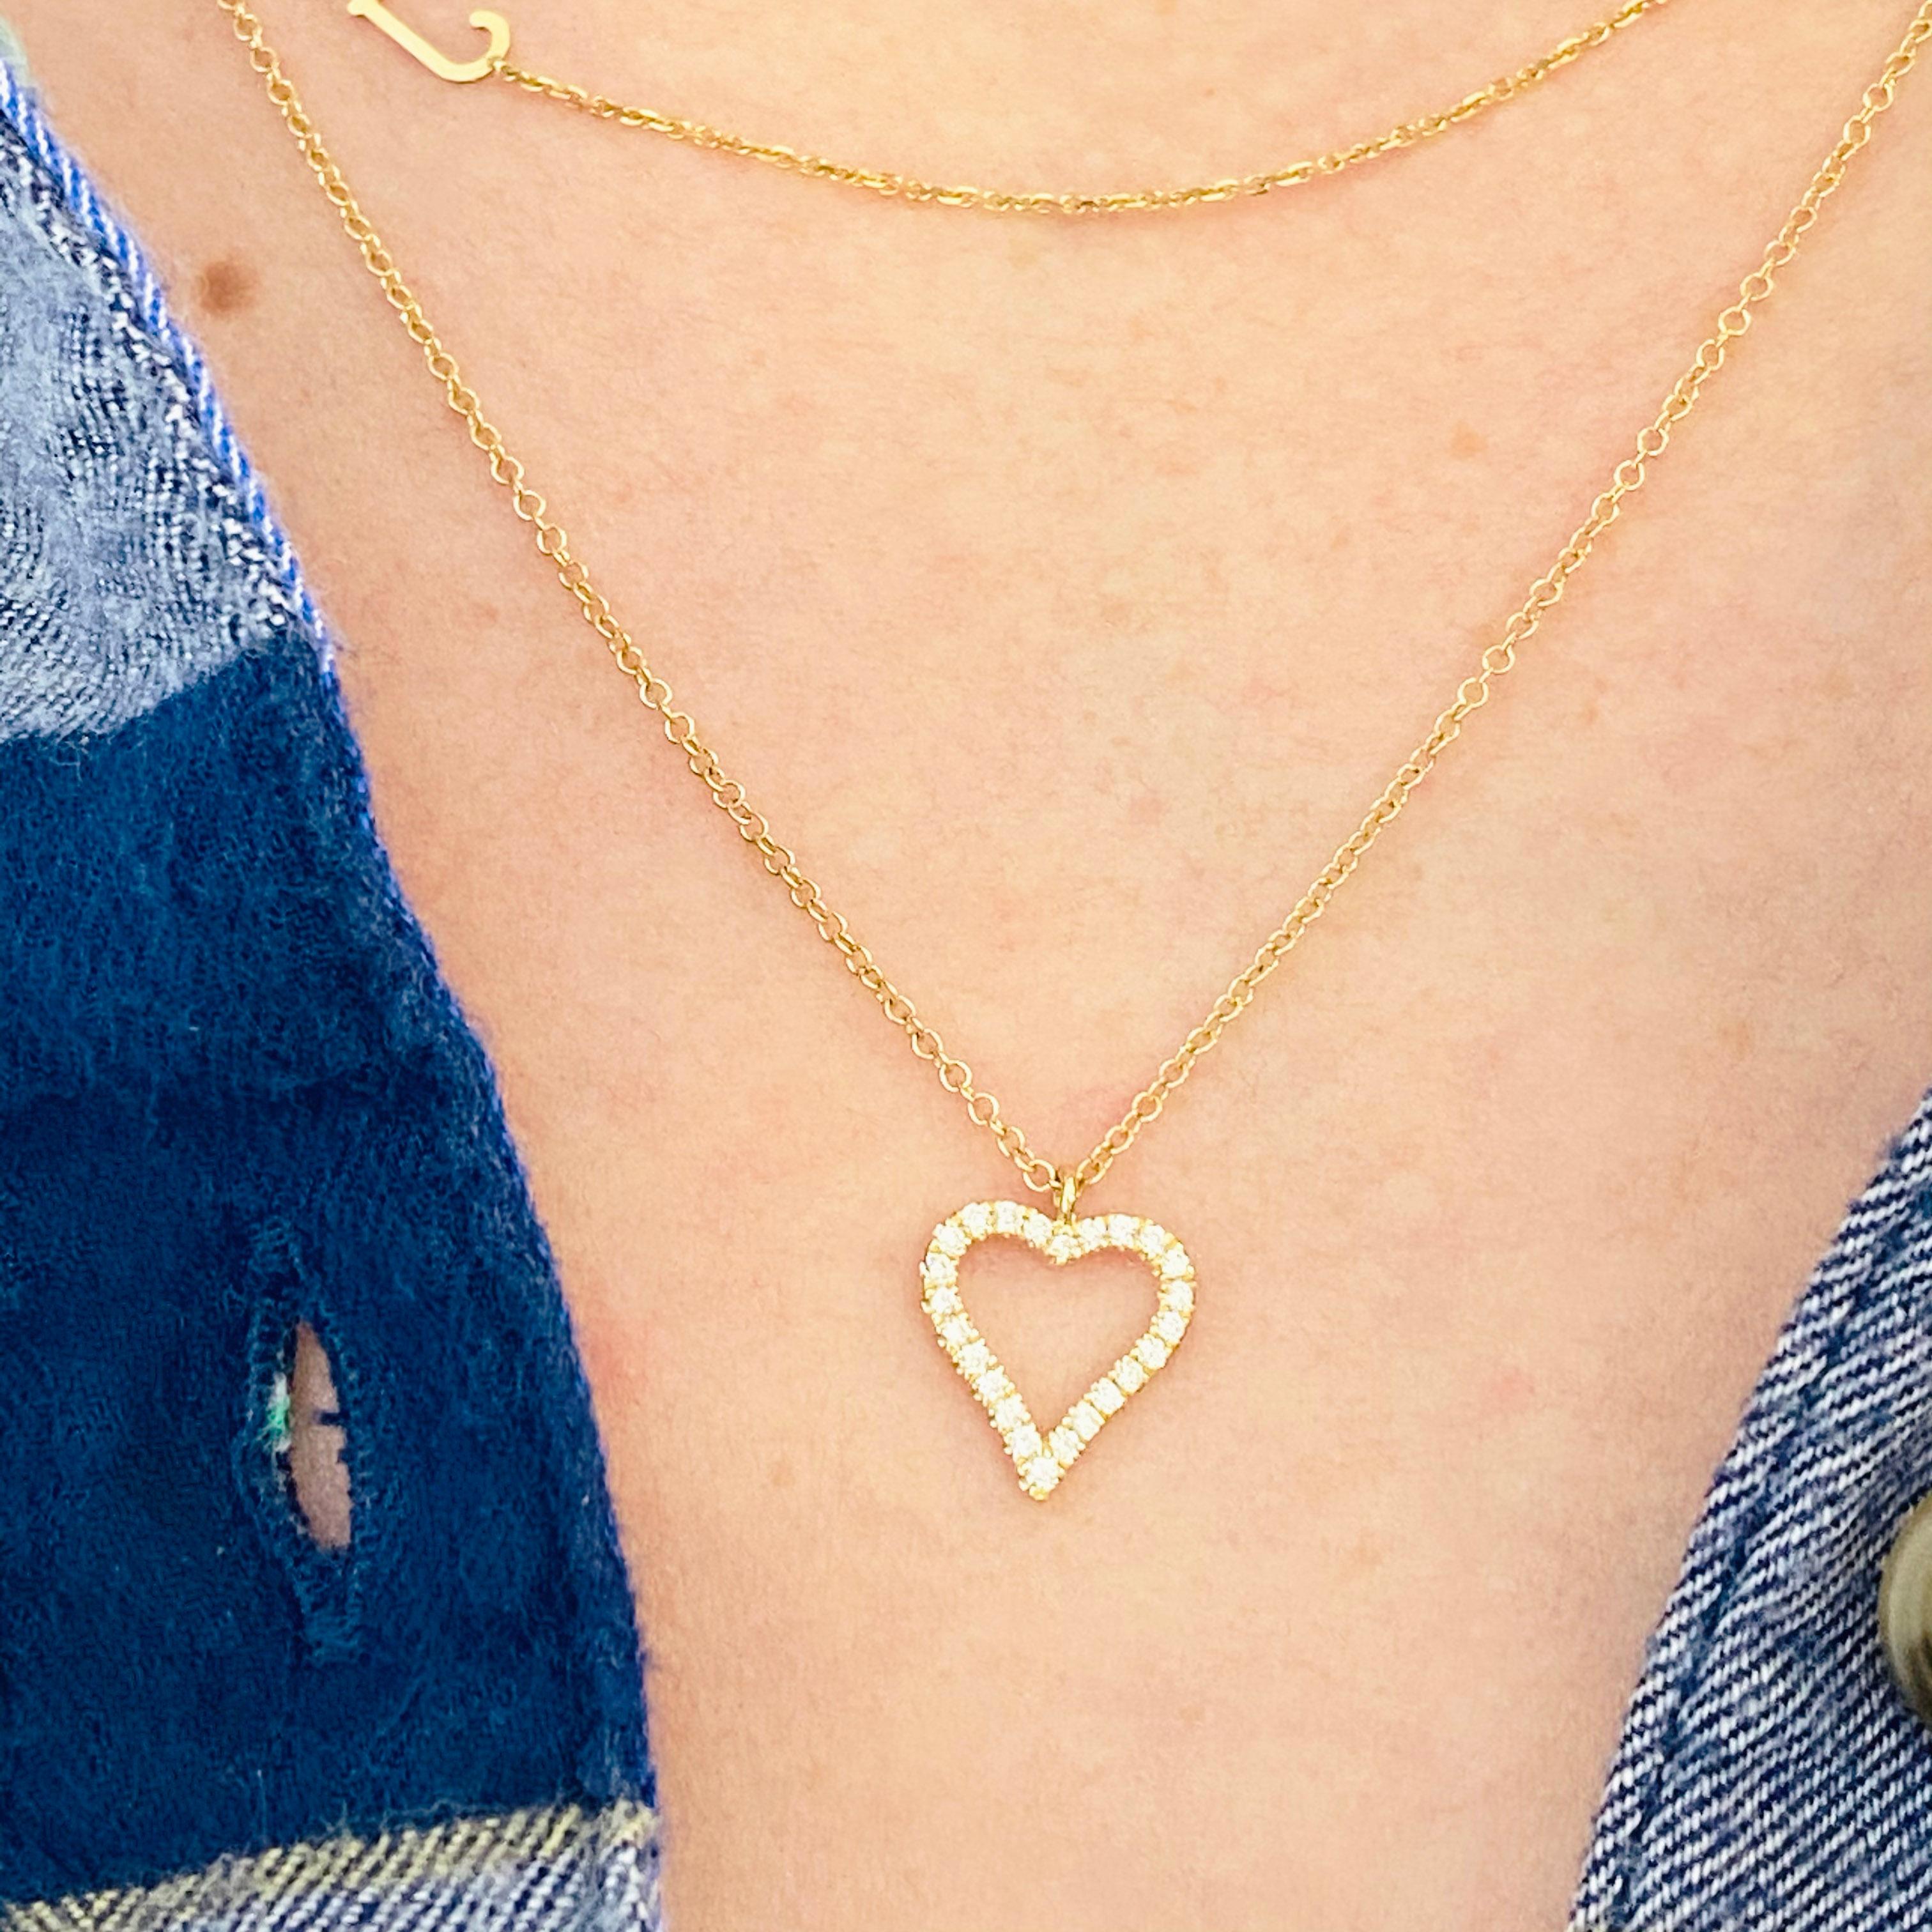 This gorgeous 14k yellow gold open heart pendant dripping with diamonds is sure to put a smile on anyone's face! This necklace looks beautiful worn by itself and also looks wonderful in a necklace stack. This necklace would make a wonderful gift for